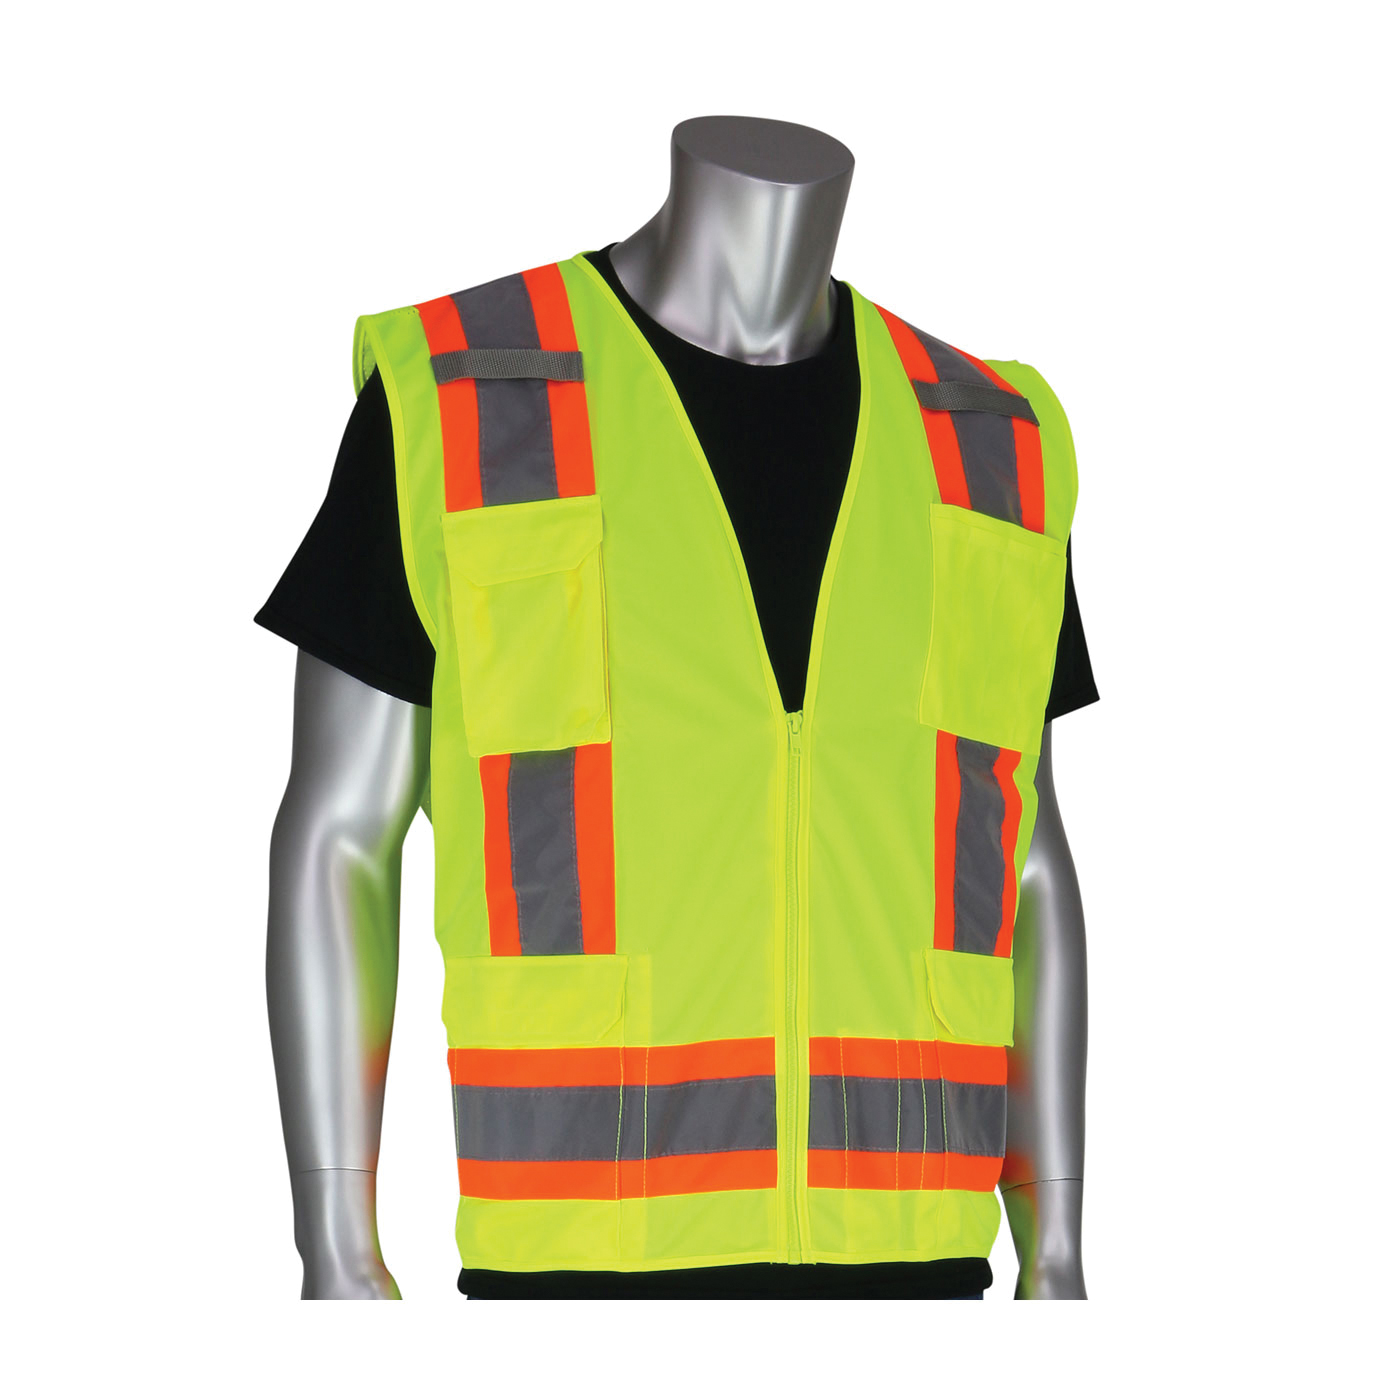 PIP® 302-0500S-YEL/3X 2-Tone Surveyor Safety Vest, 3XL, Hi-Viz Lime Yellow, Polyester/Solid Tricot, Zipper Closure, 11 Pockets, ANSI Class: Class 2, Specifications Met: ANSI 107 Type R